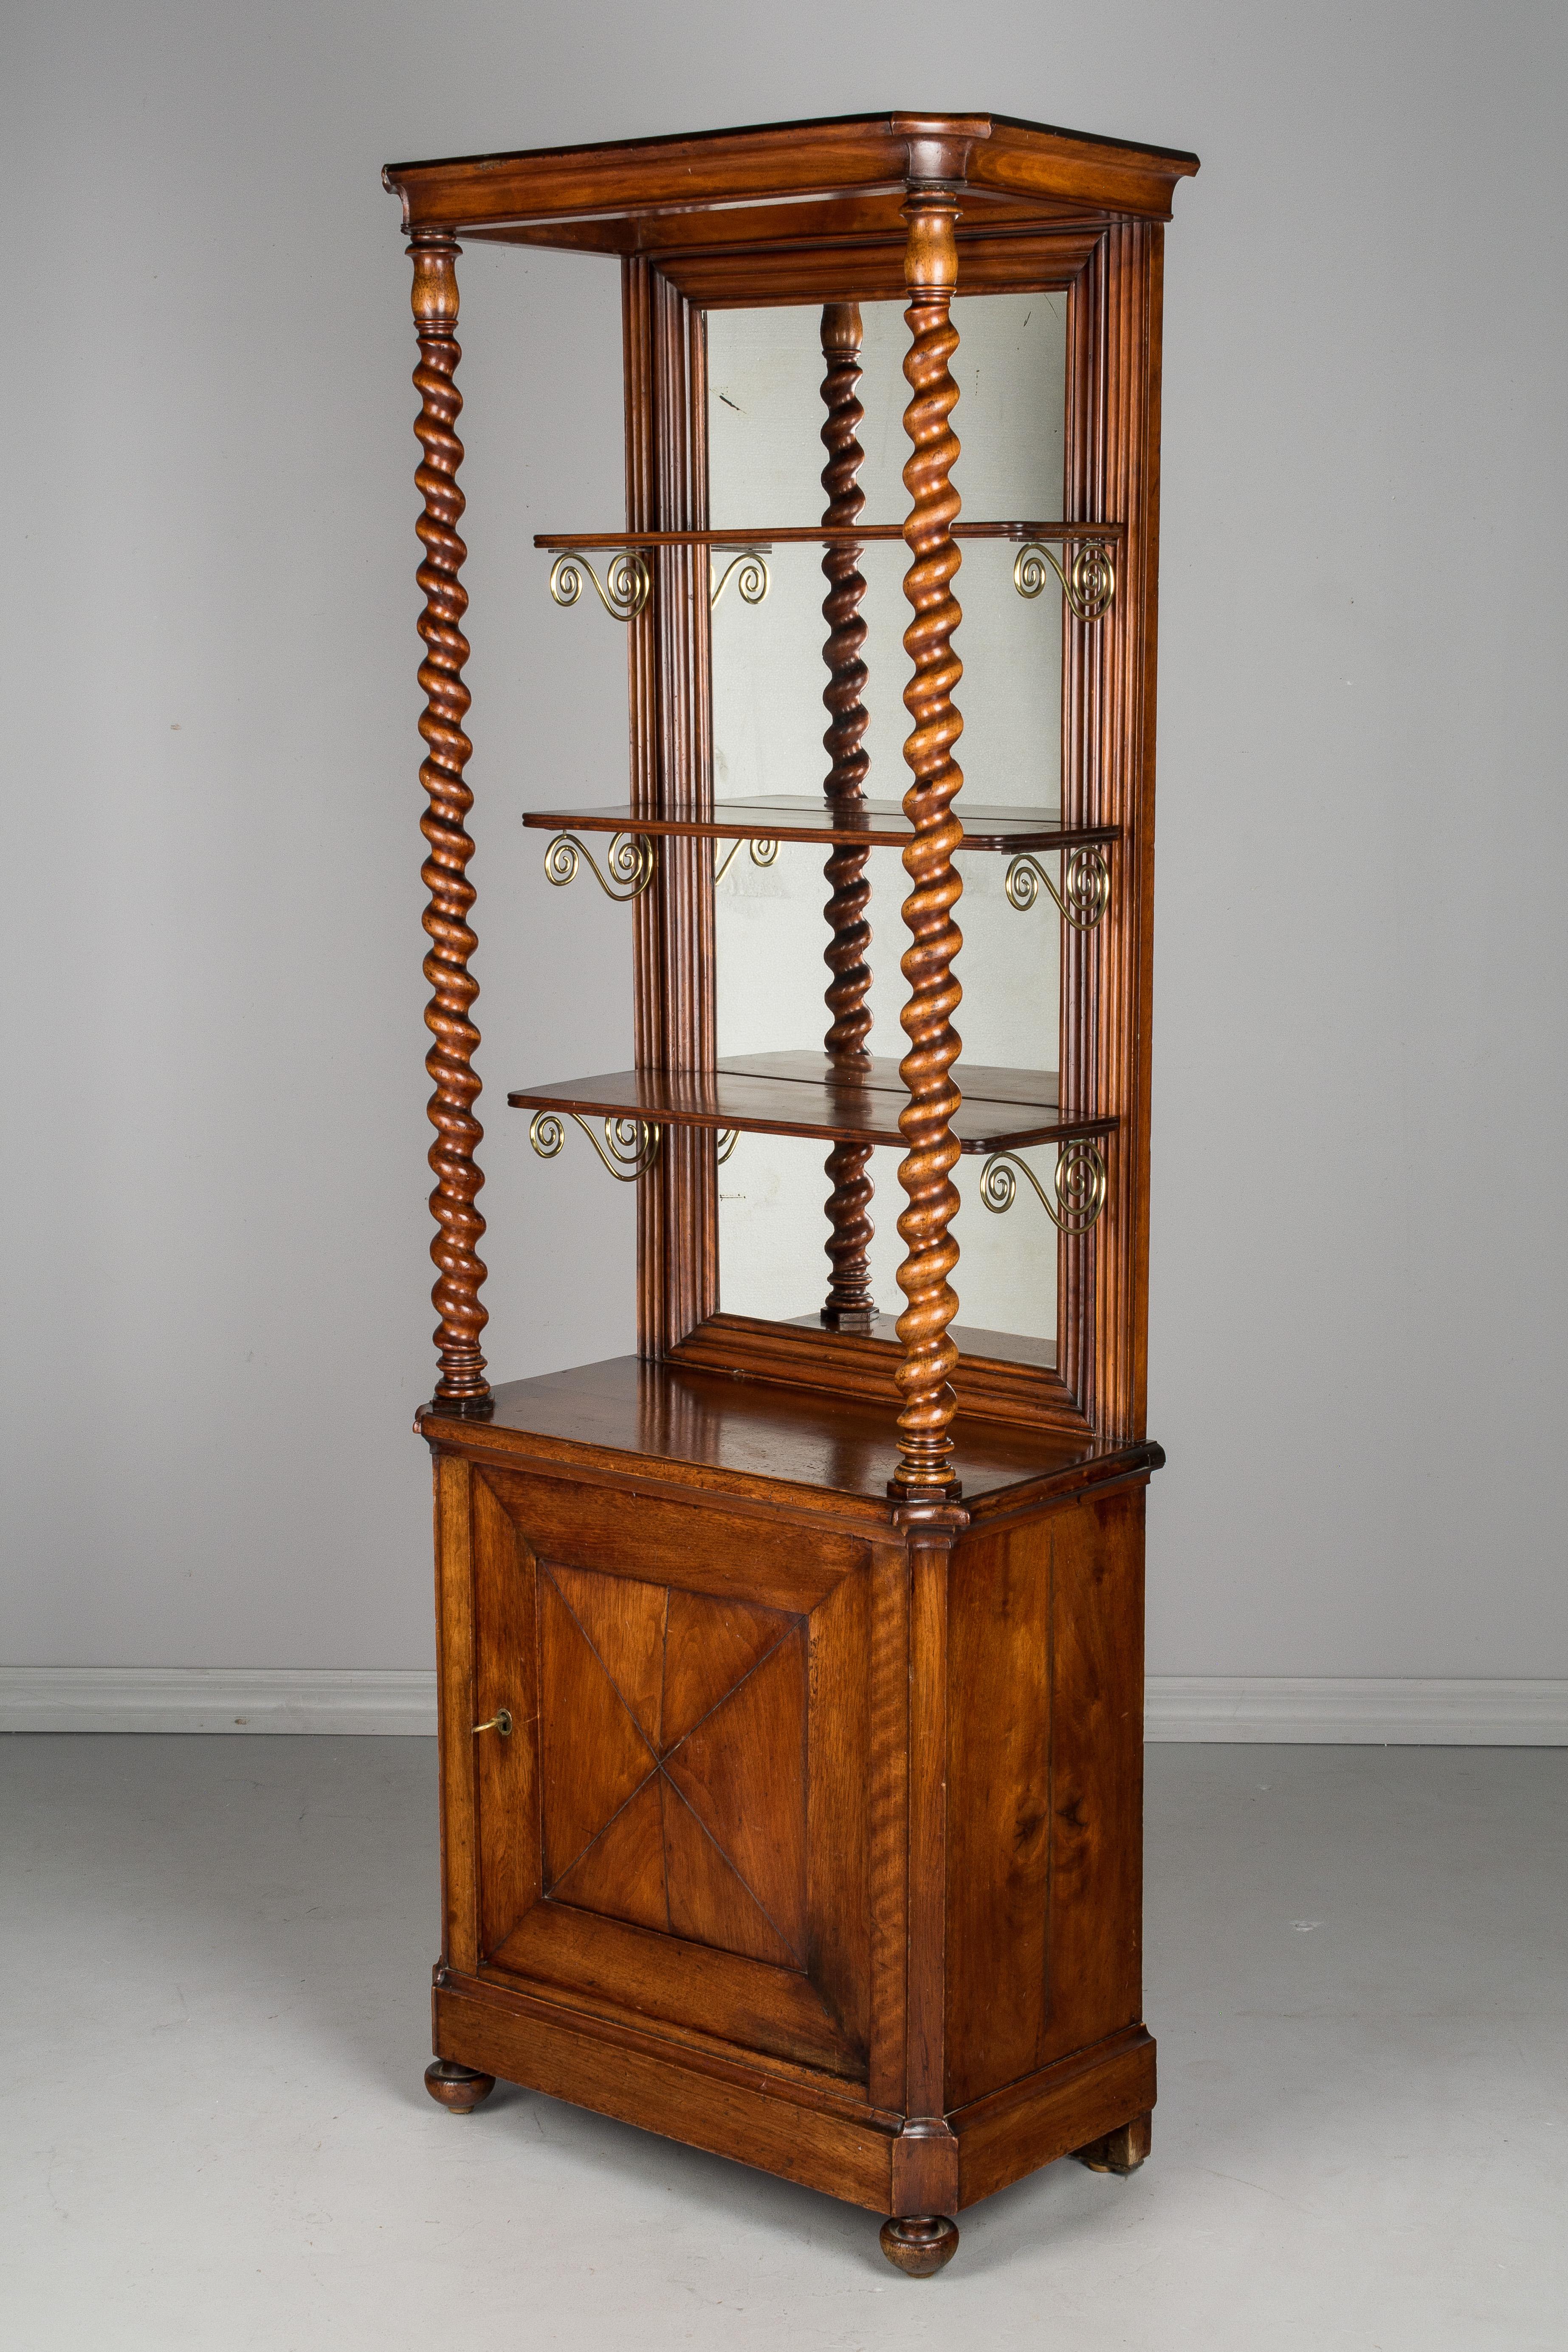 A 19th century French display cabinet from a chocolate shop. Made of solid mahogany with barley twist columns, a mirrored back and three shelves with brass supports. Cabinet with working lock and key opens to one shelf. The mirror is old with nice